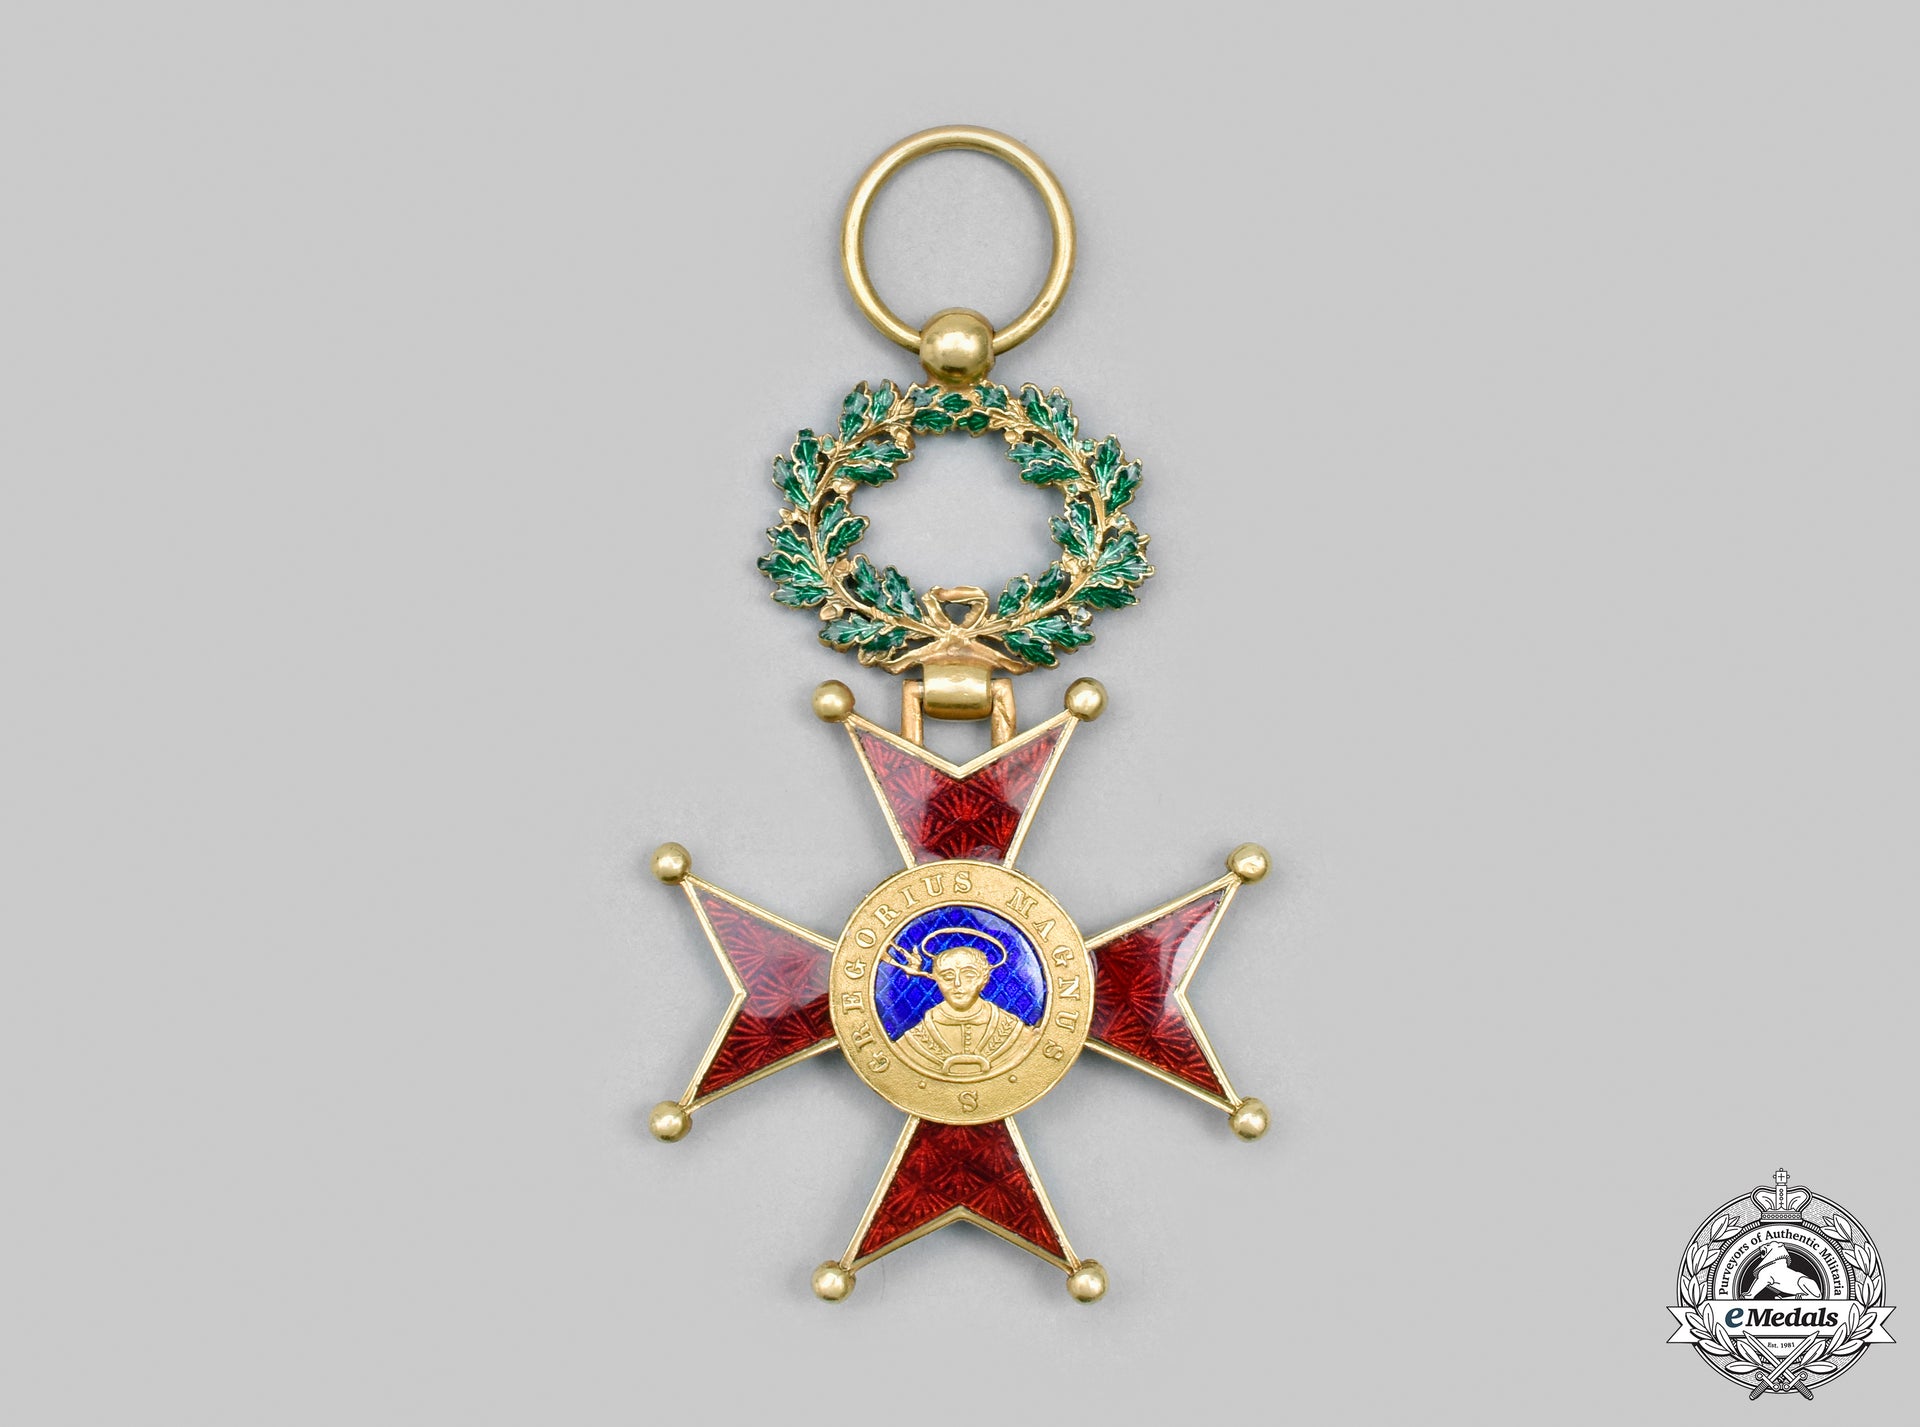 vatican._an_order_of_st._gregory_the_great_for_civil_merit_in_gold,_knight,_c.1925_cic_2021_183_mnc9786_1_1_1